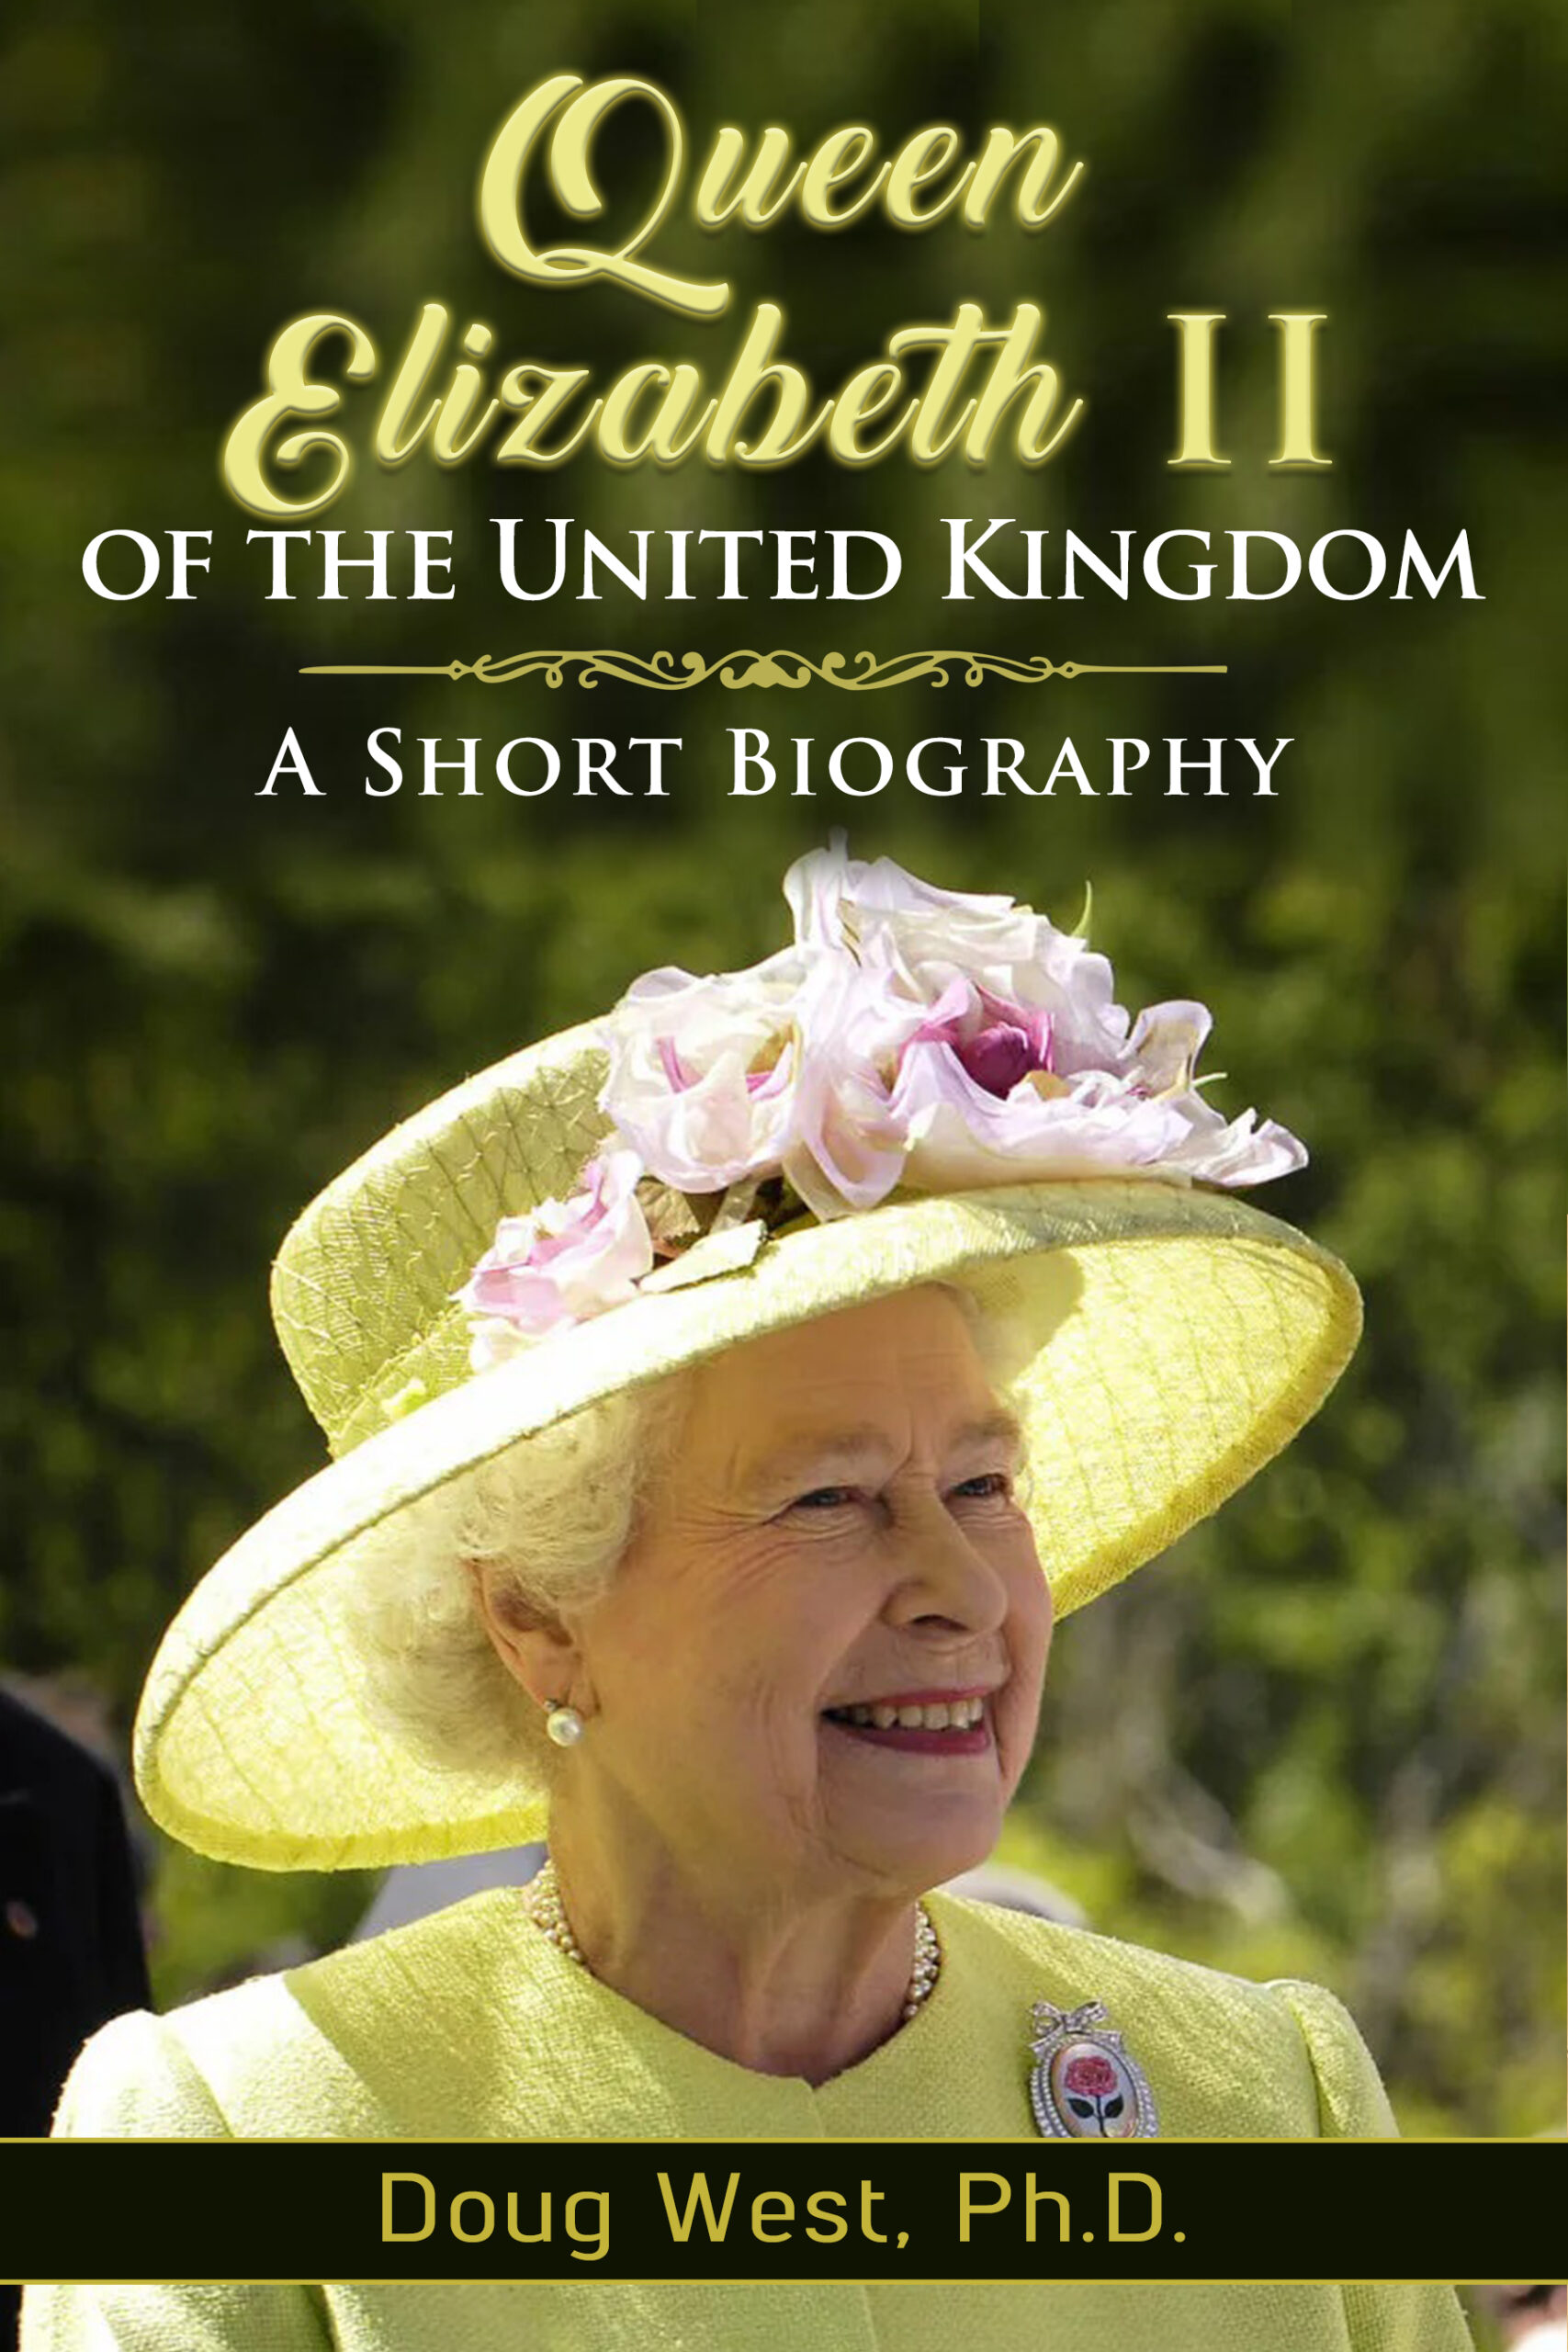 latest biography of the queen